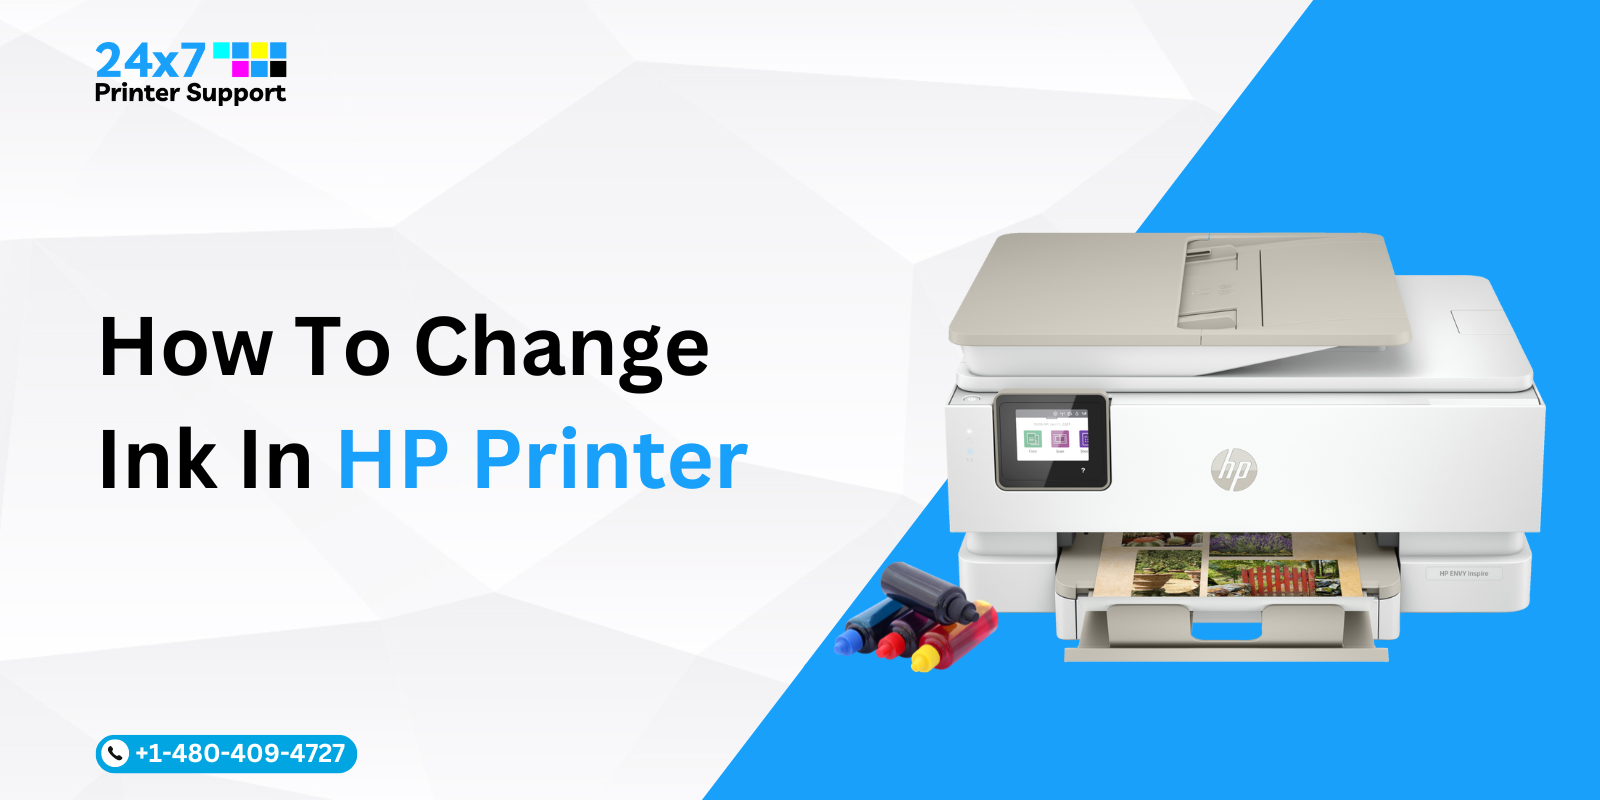 How To Change Ink In HP Printer